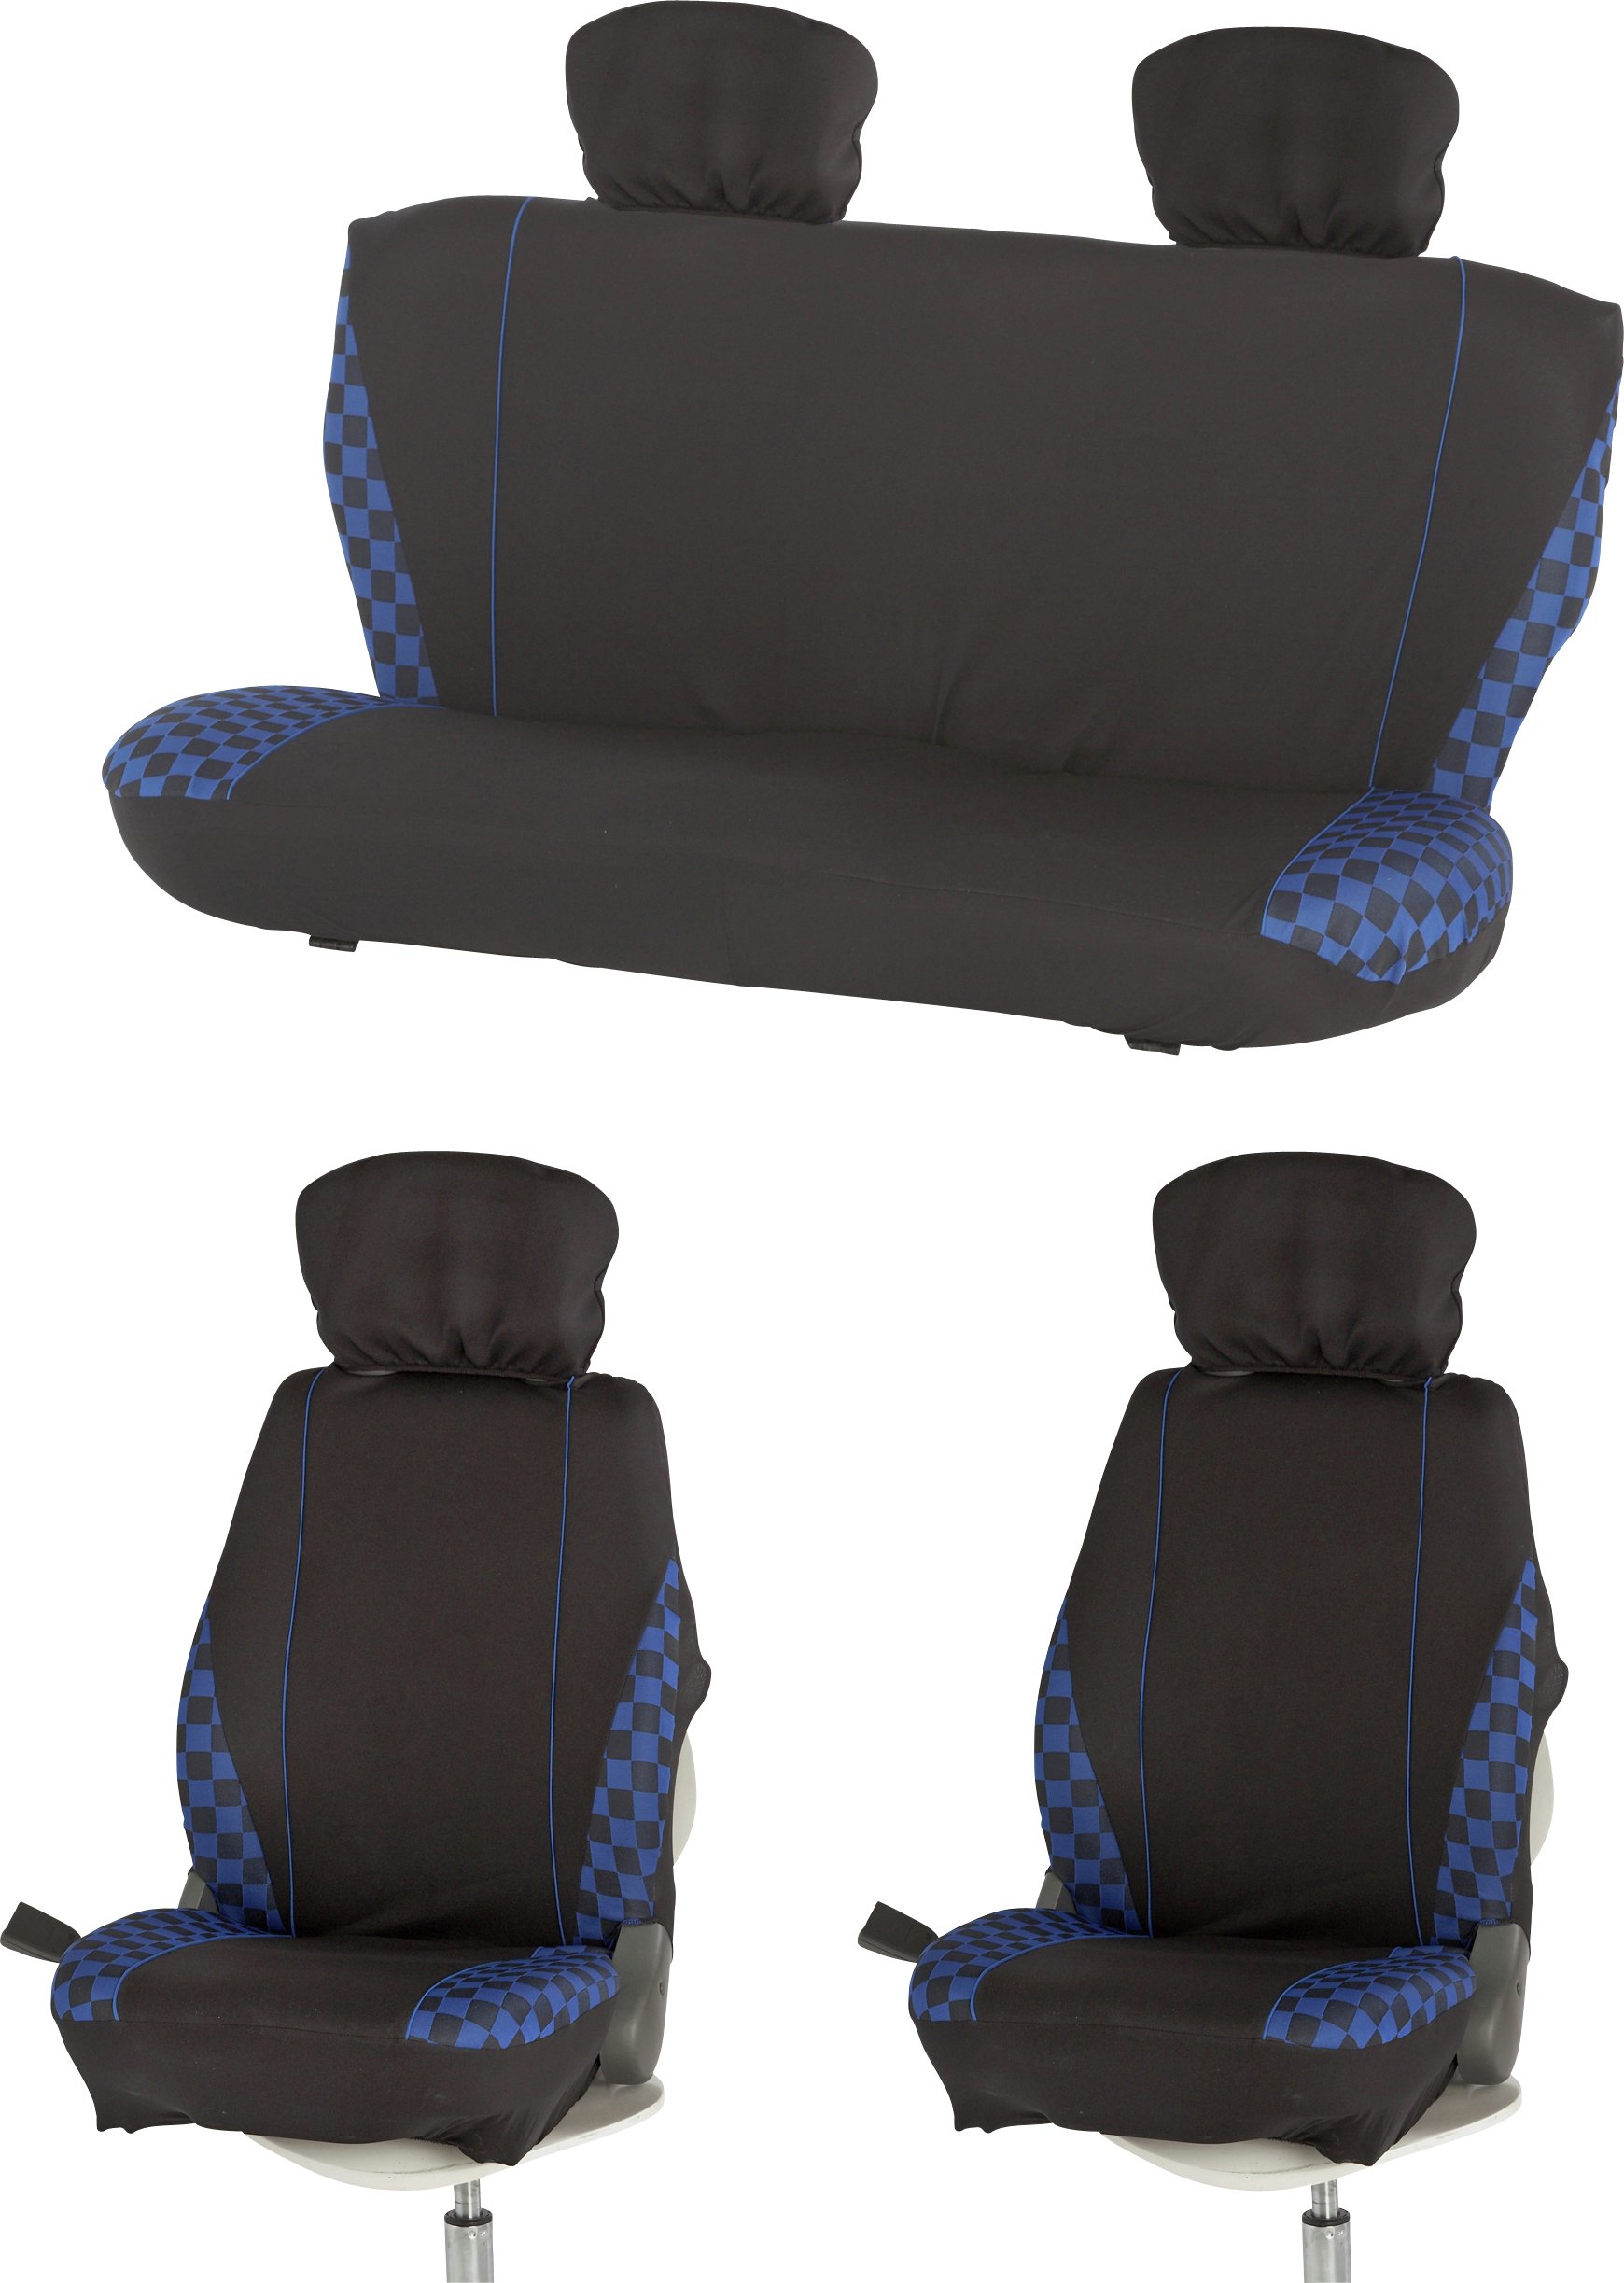 Review of Streetwize - Check Car Seat Covers